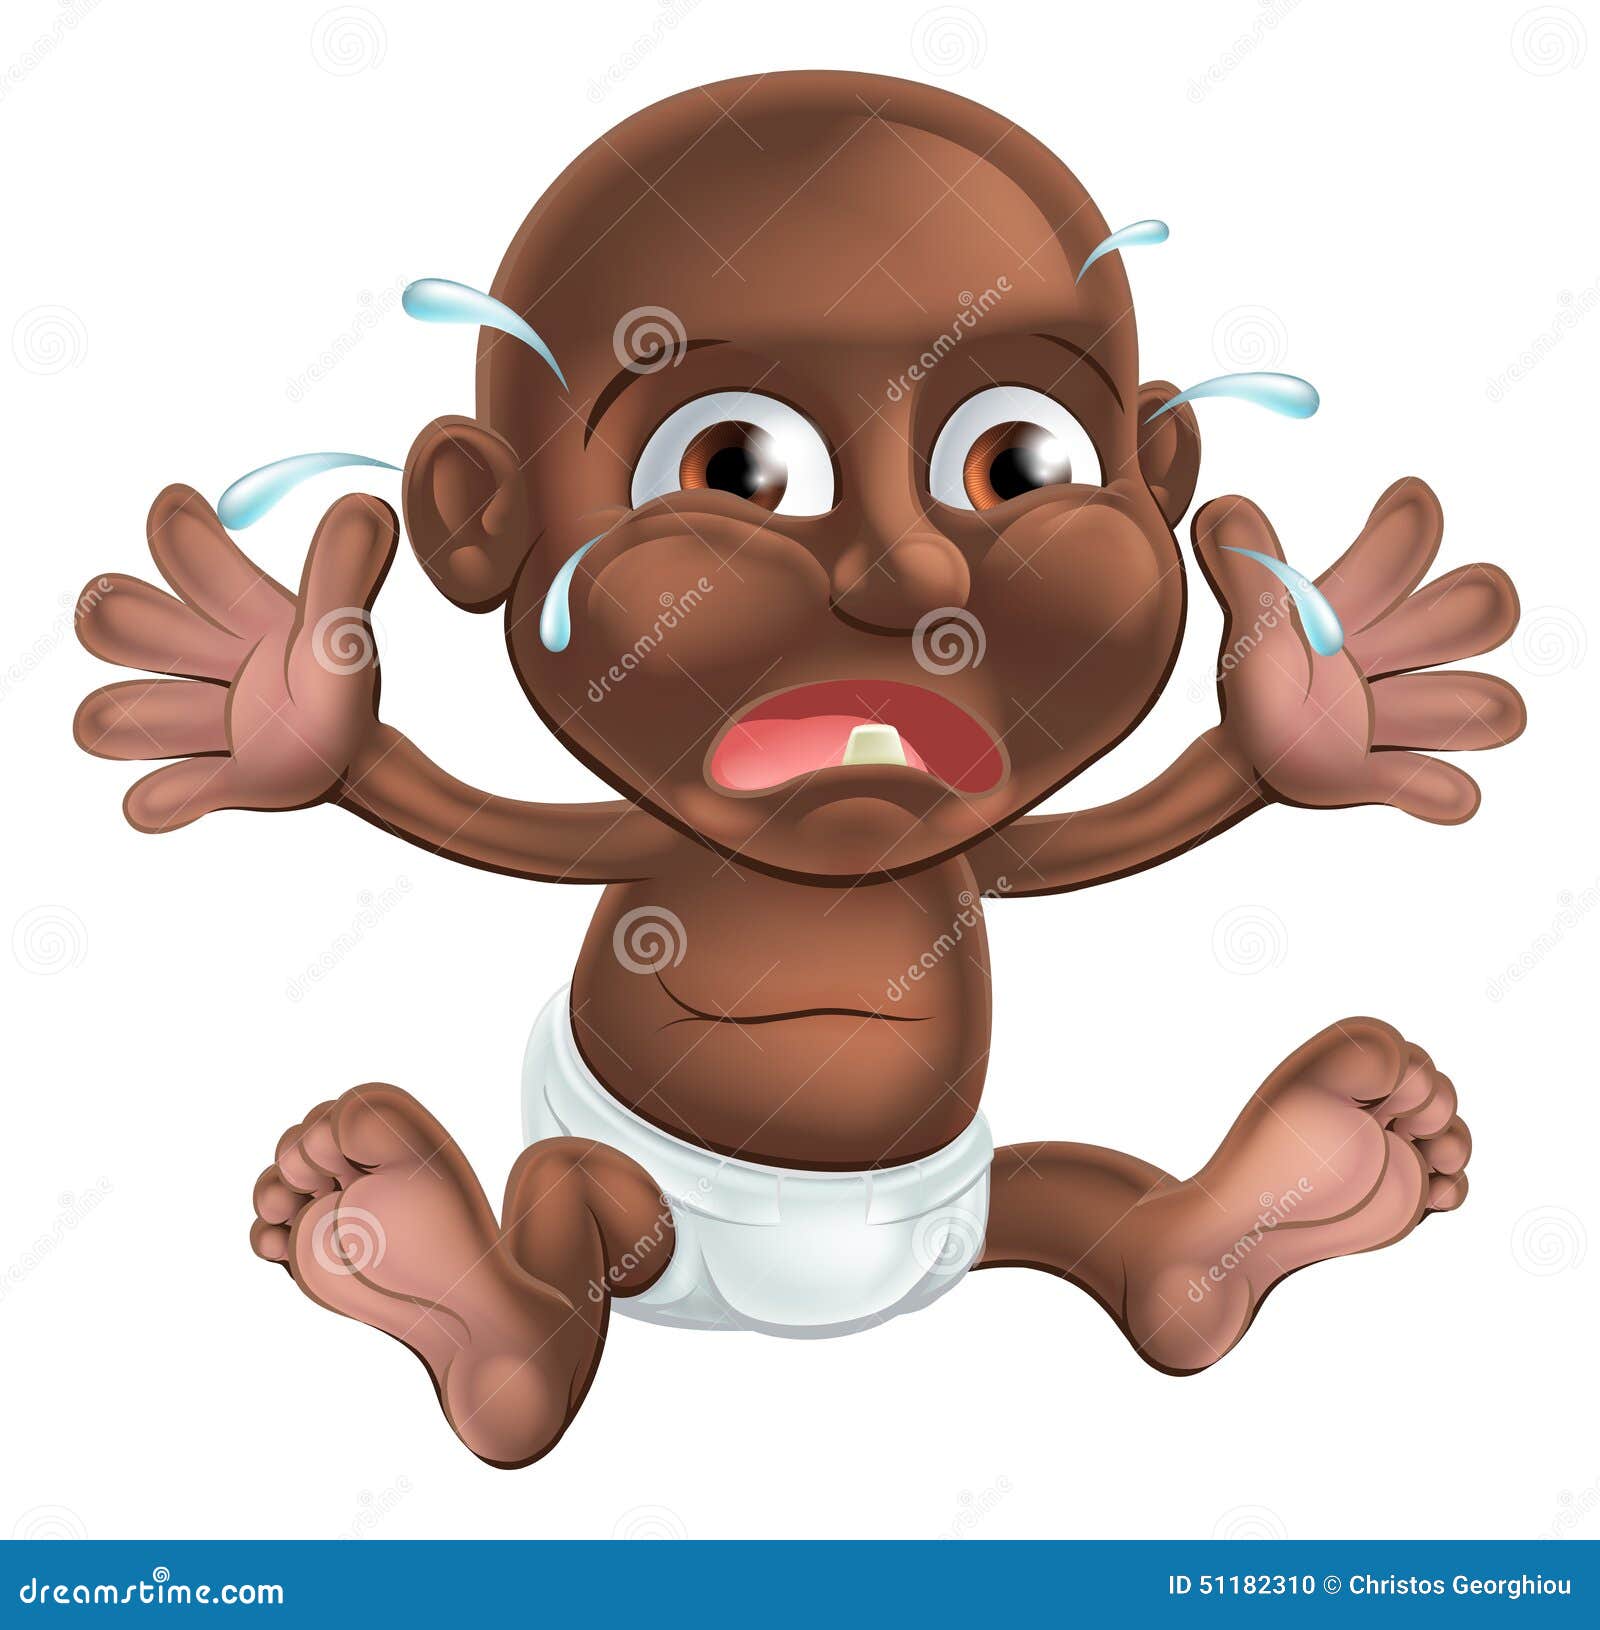 Crying cartoon baby stock vector. Illustration of infant - 51182310